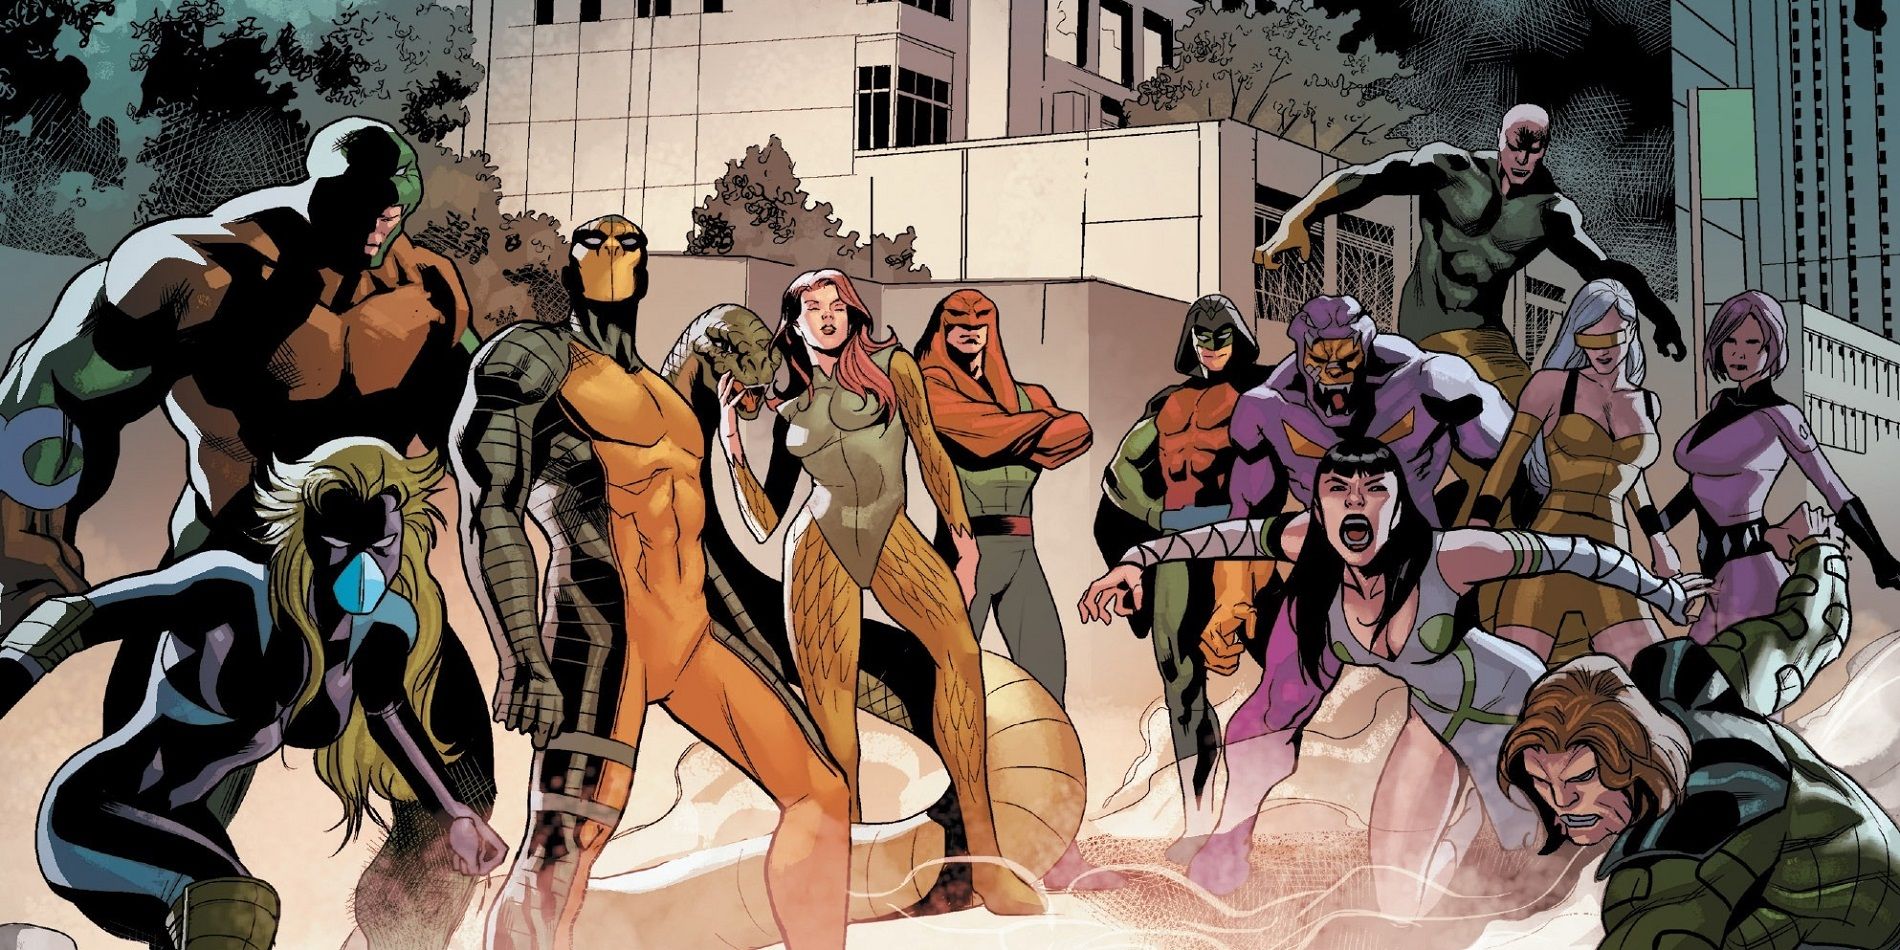 The Serpent Society from Marvel Comics